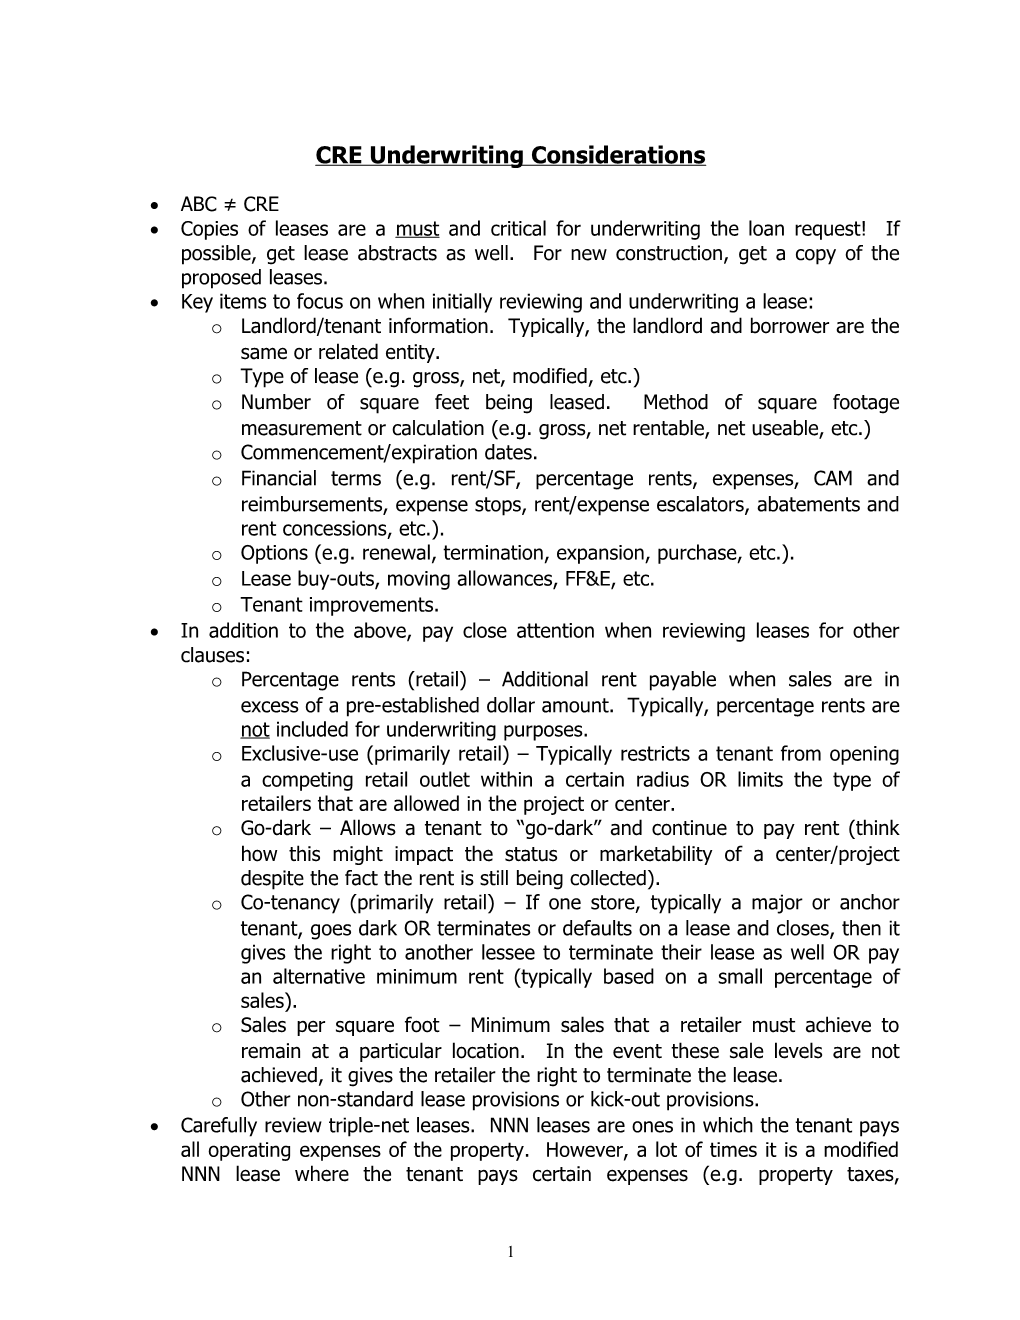 CRE Underwriting Considerations (Continued)